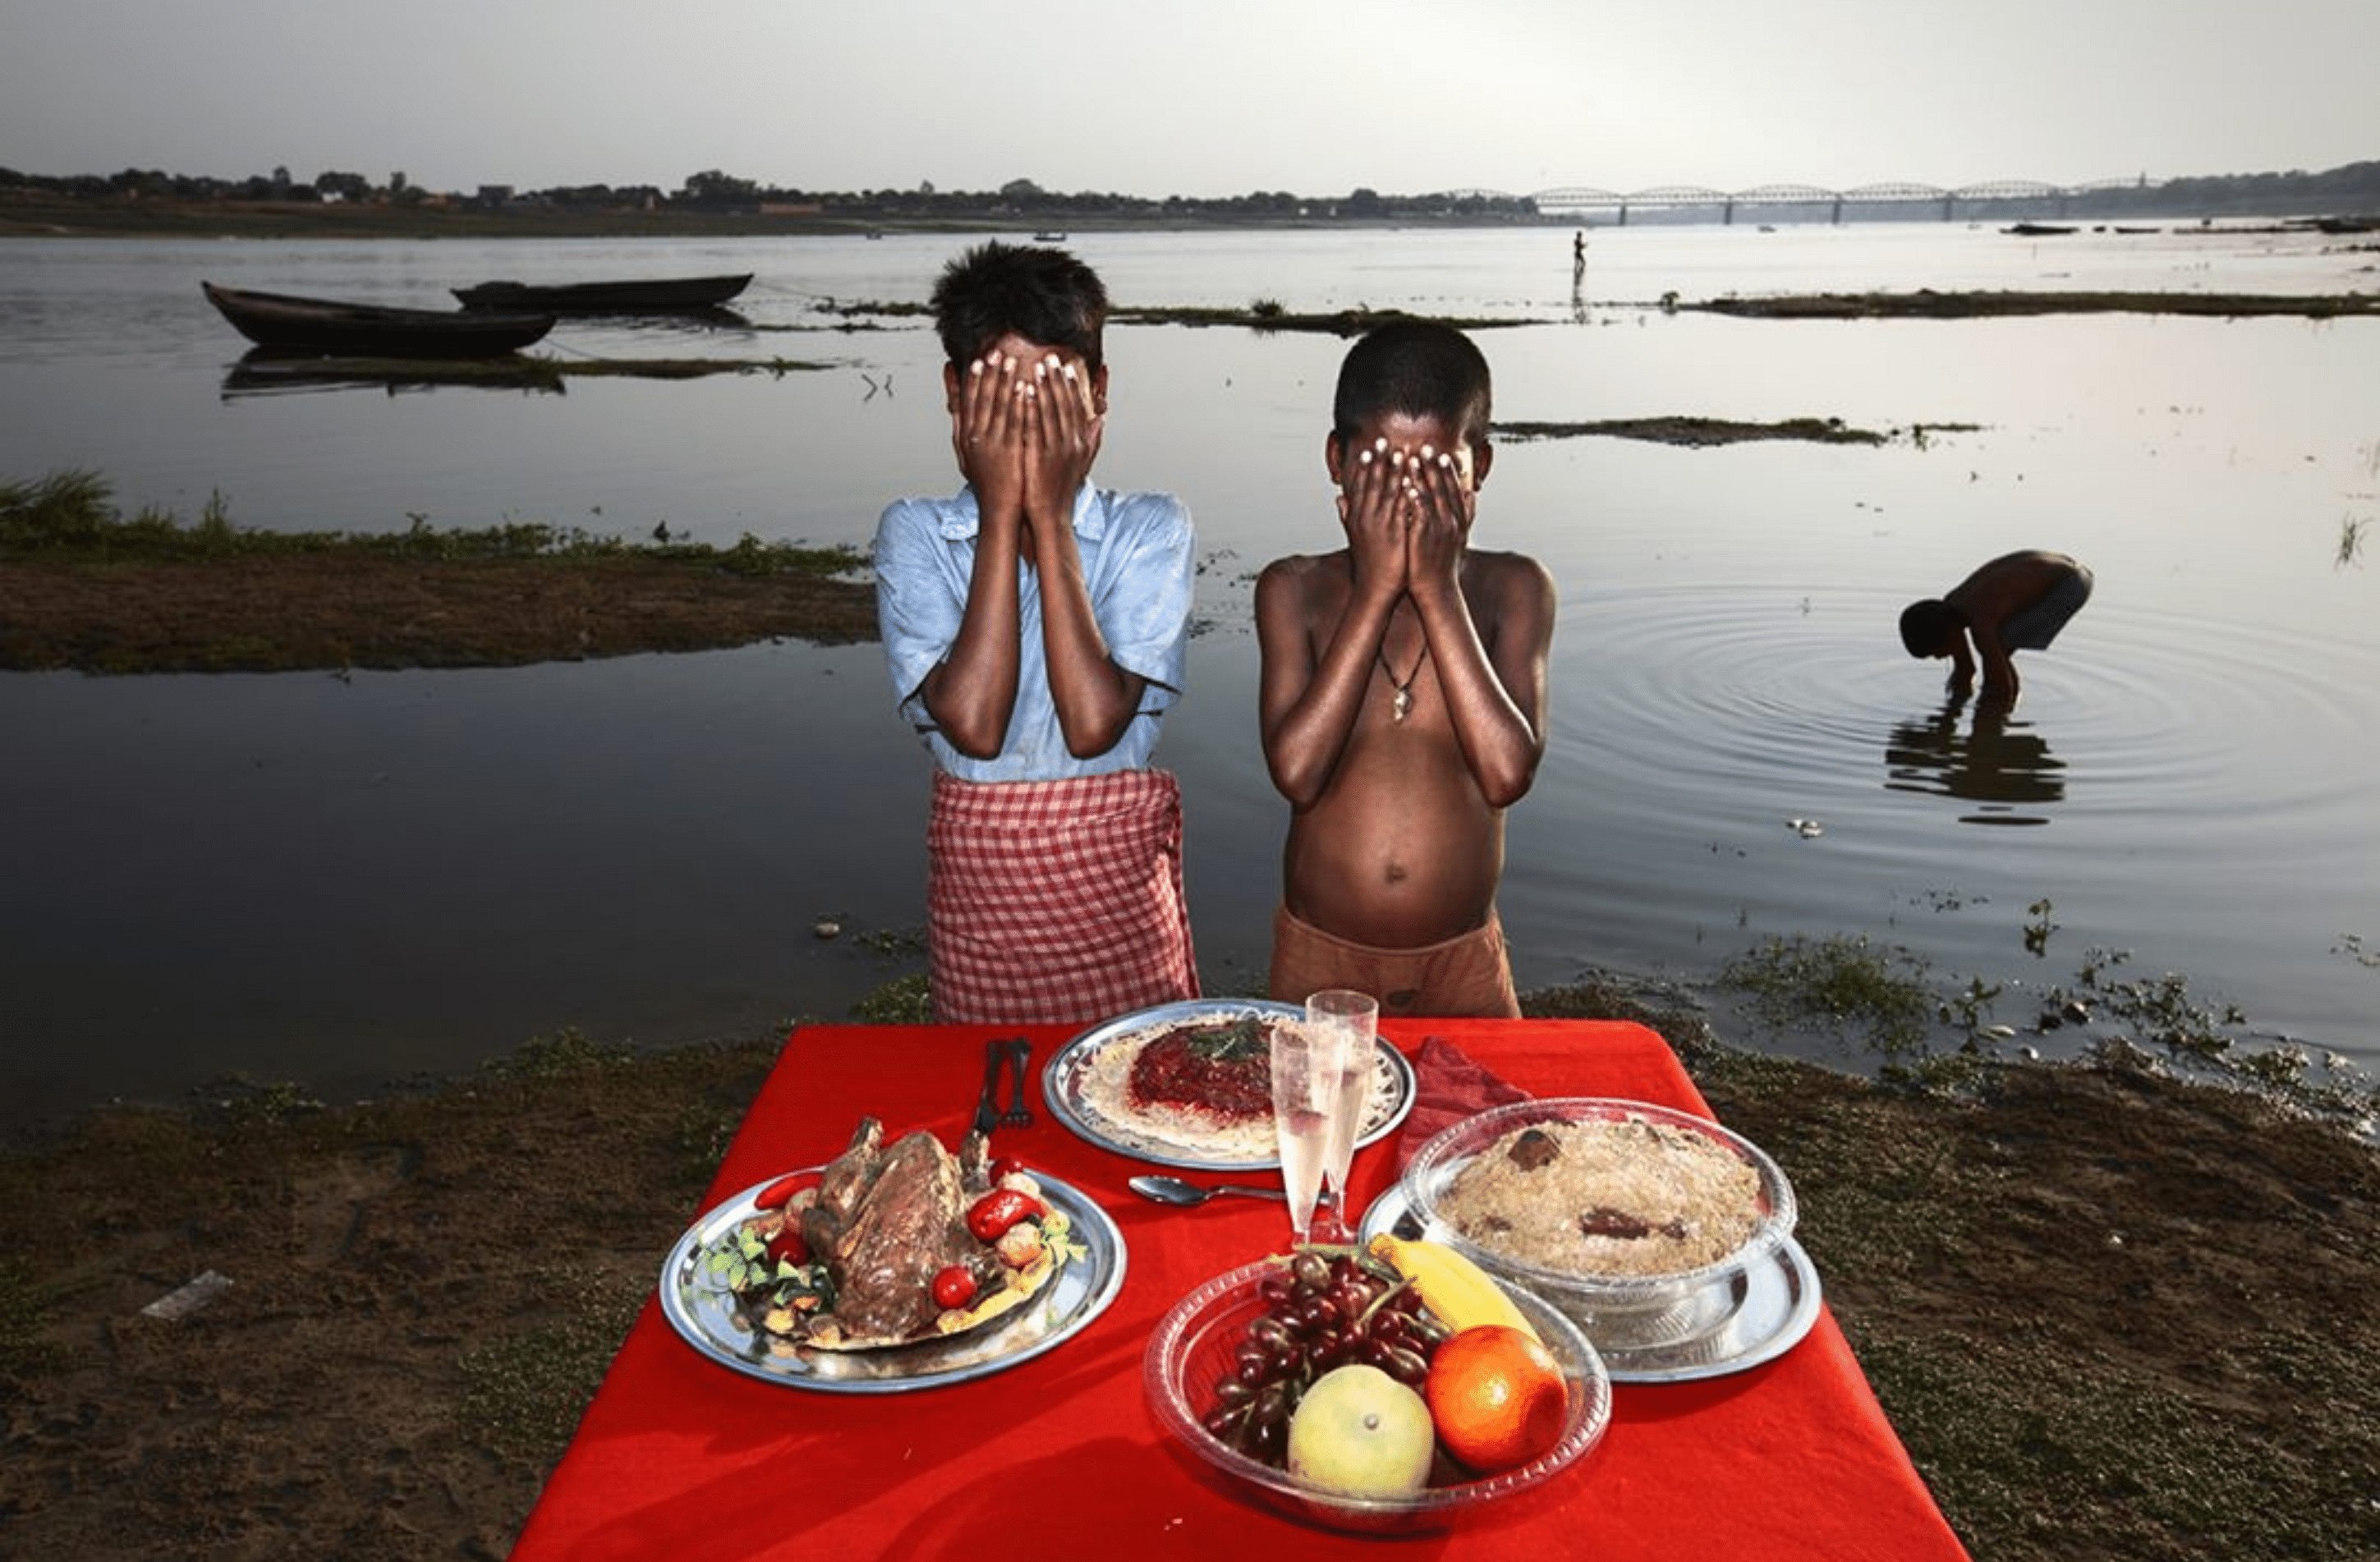 Poverty porn sells, but it isn't helping the poor people in India